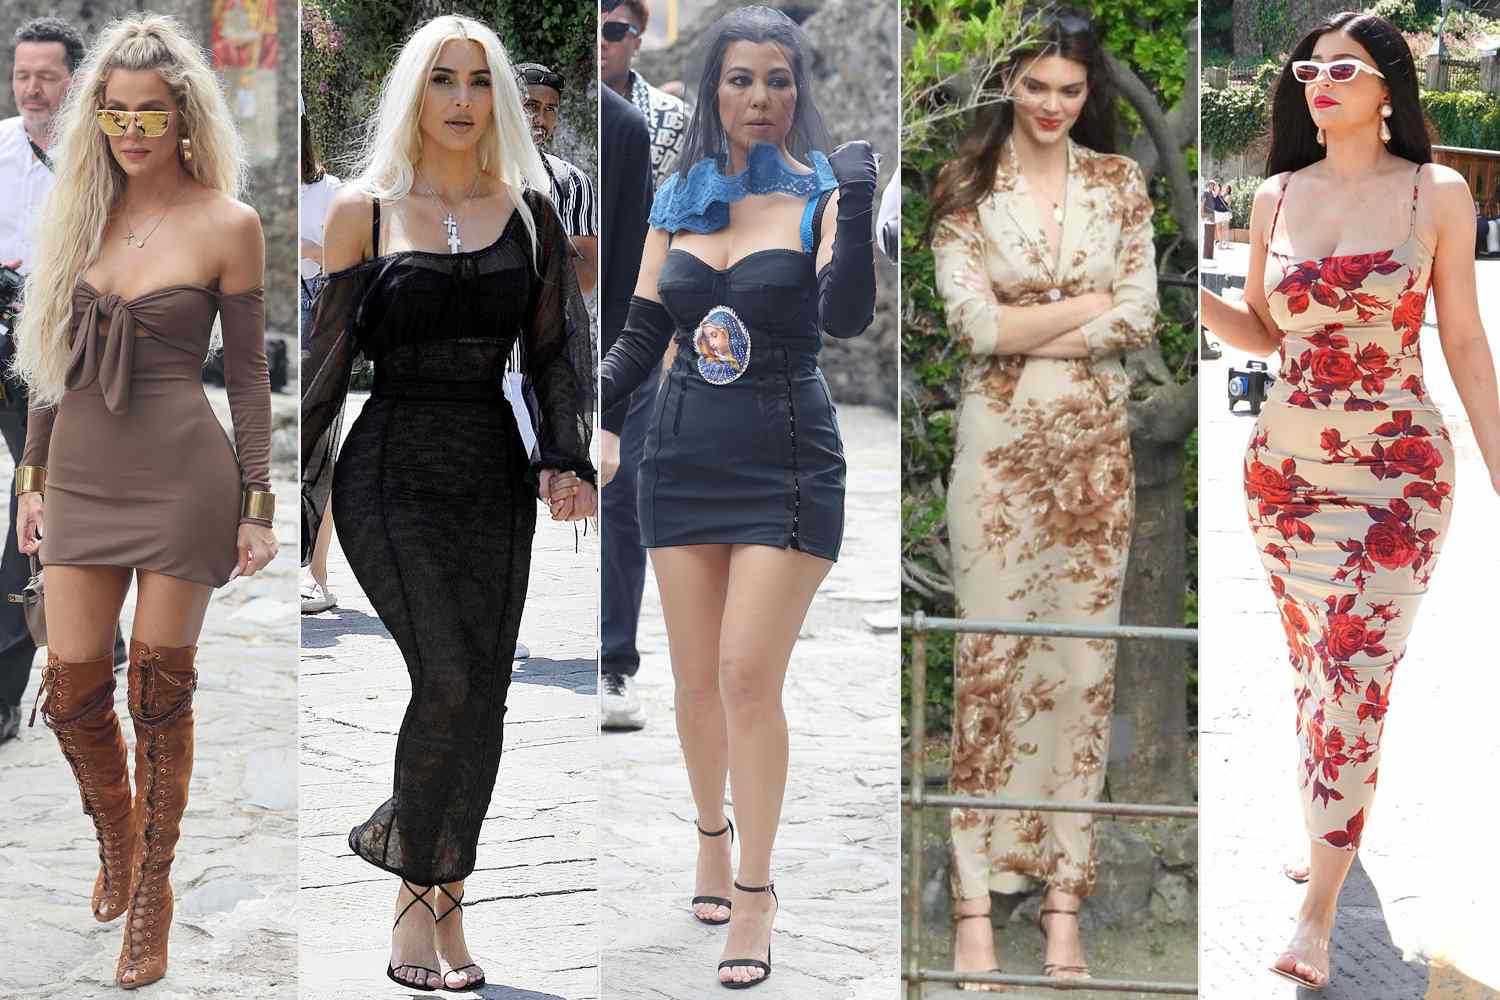 PORTOFINO, ITALY - MAY 21: Khloe Kardashian arriving for lunch at the Abbey of San Fruttuoso on May 21, 2022 in Portofino, Italy. (Photo by NINO/GC Images); Portofino, ITALY - Kim Kardashian is seen wearing a fitted black dress while with her daughter North West in Portofino ahead of Kourtney Kardashian's wedding to Travis Barker. Pictured: Kim Kardashian - North West BACKGRID USA 21 MAY 2022 BYLINE MUST READ: Cobra Team / BACKGRID USA: +1 310 798 9111 / usasales@backgrid.com UK: +44 208 344 2007 / uksales@backgrid.com *UK Clients - Pictures Containing Children Please Pixelate Face Prior To Publication*; PORTOFINO, ITALY - MAY 21: Kourtney Kardashian arriving for lunch at the Abbey of San Fruttuoso on May 21, 2022 in Portofino, Italy. (Photo by NINO/GC Images); Kendall Jenner and Devin Booker attending Kourtney Kardashian's wedding in Portofino. 21 May 2022 Pictured: Kendall Jenner, Devin Booker. Photo credit: MEGA TheMegaAgency.com +1 888 505 6342; Kylie Jenners, Khloe Kardashian, Kourtney Kardashian, Travis Barker, Kris Jenner on Dolce and Gabbana's yacht. 21 May 2022 Pictured: Kylie Jenners. Photo credit: MEGA TheMegaAgency.com +1 888 505 6342